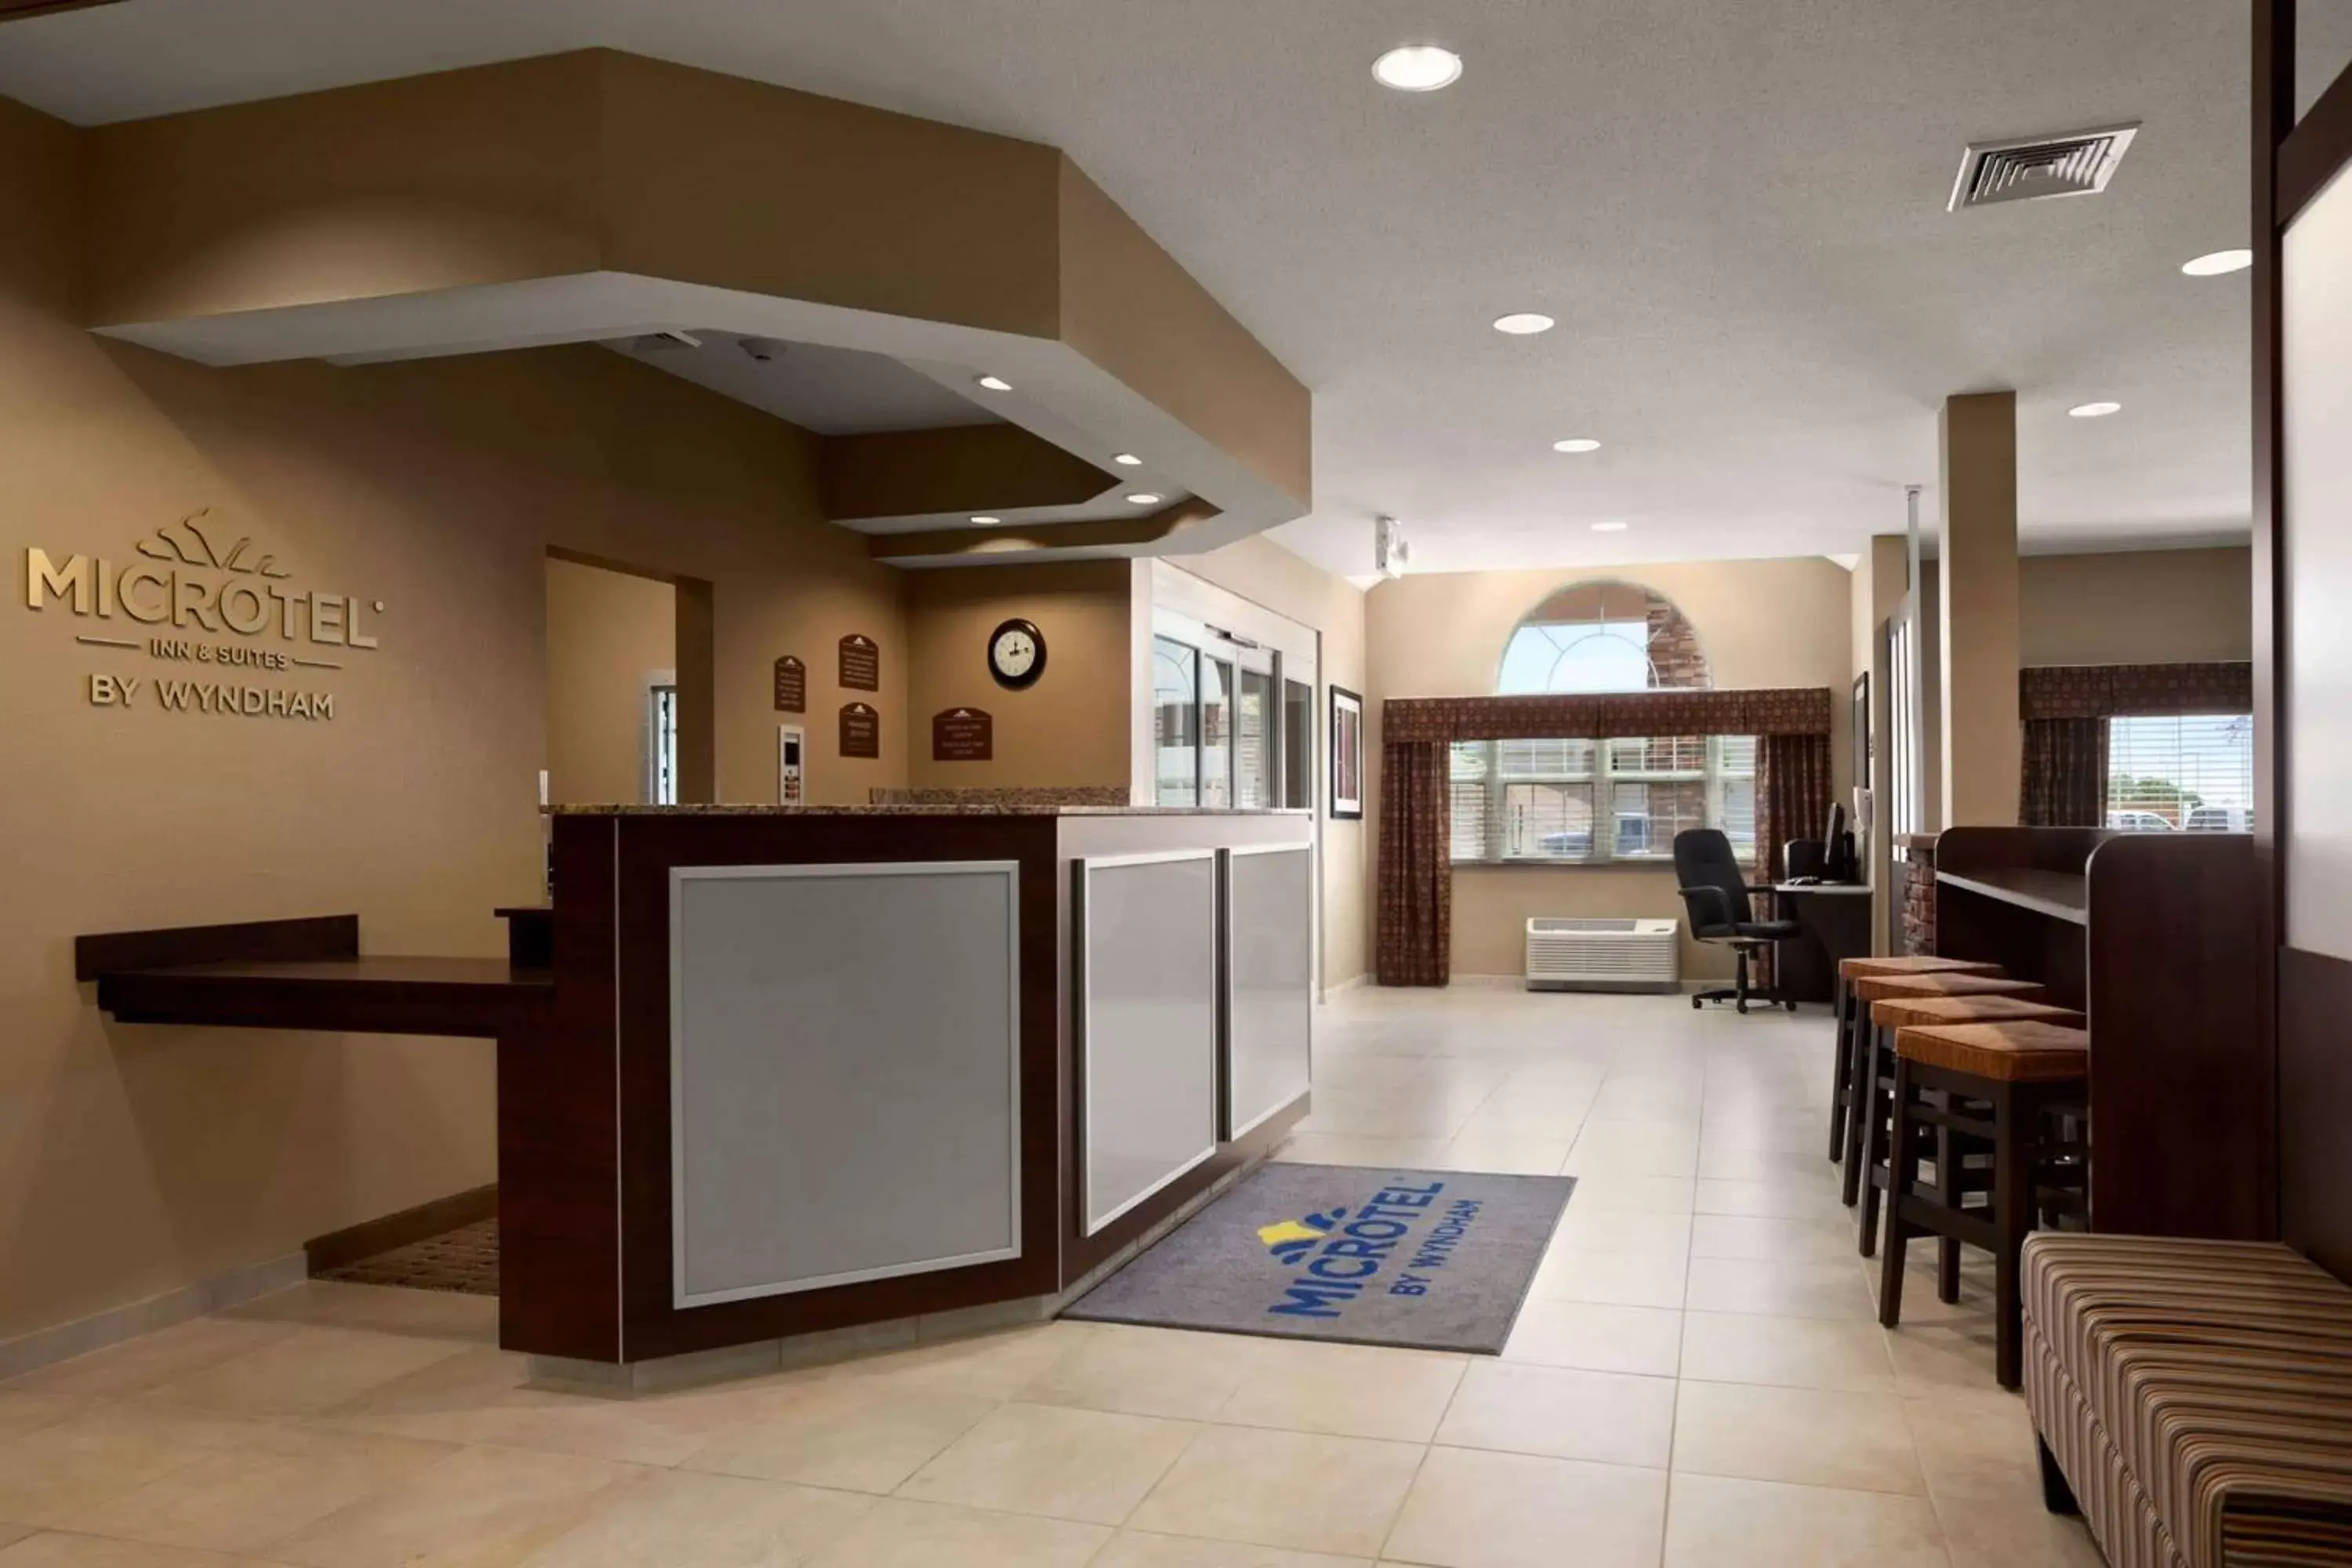 Lobby or reception in Microtel Inn & Suites - St Clairsville